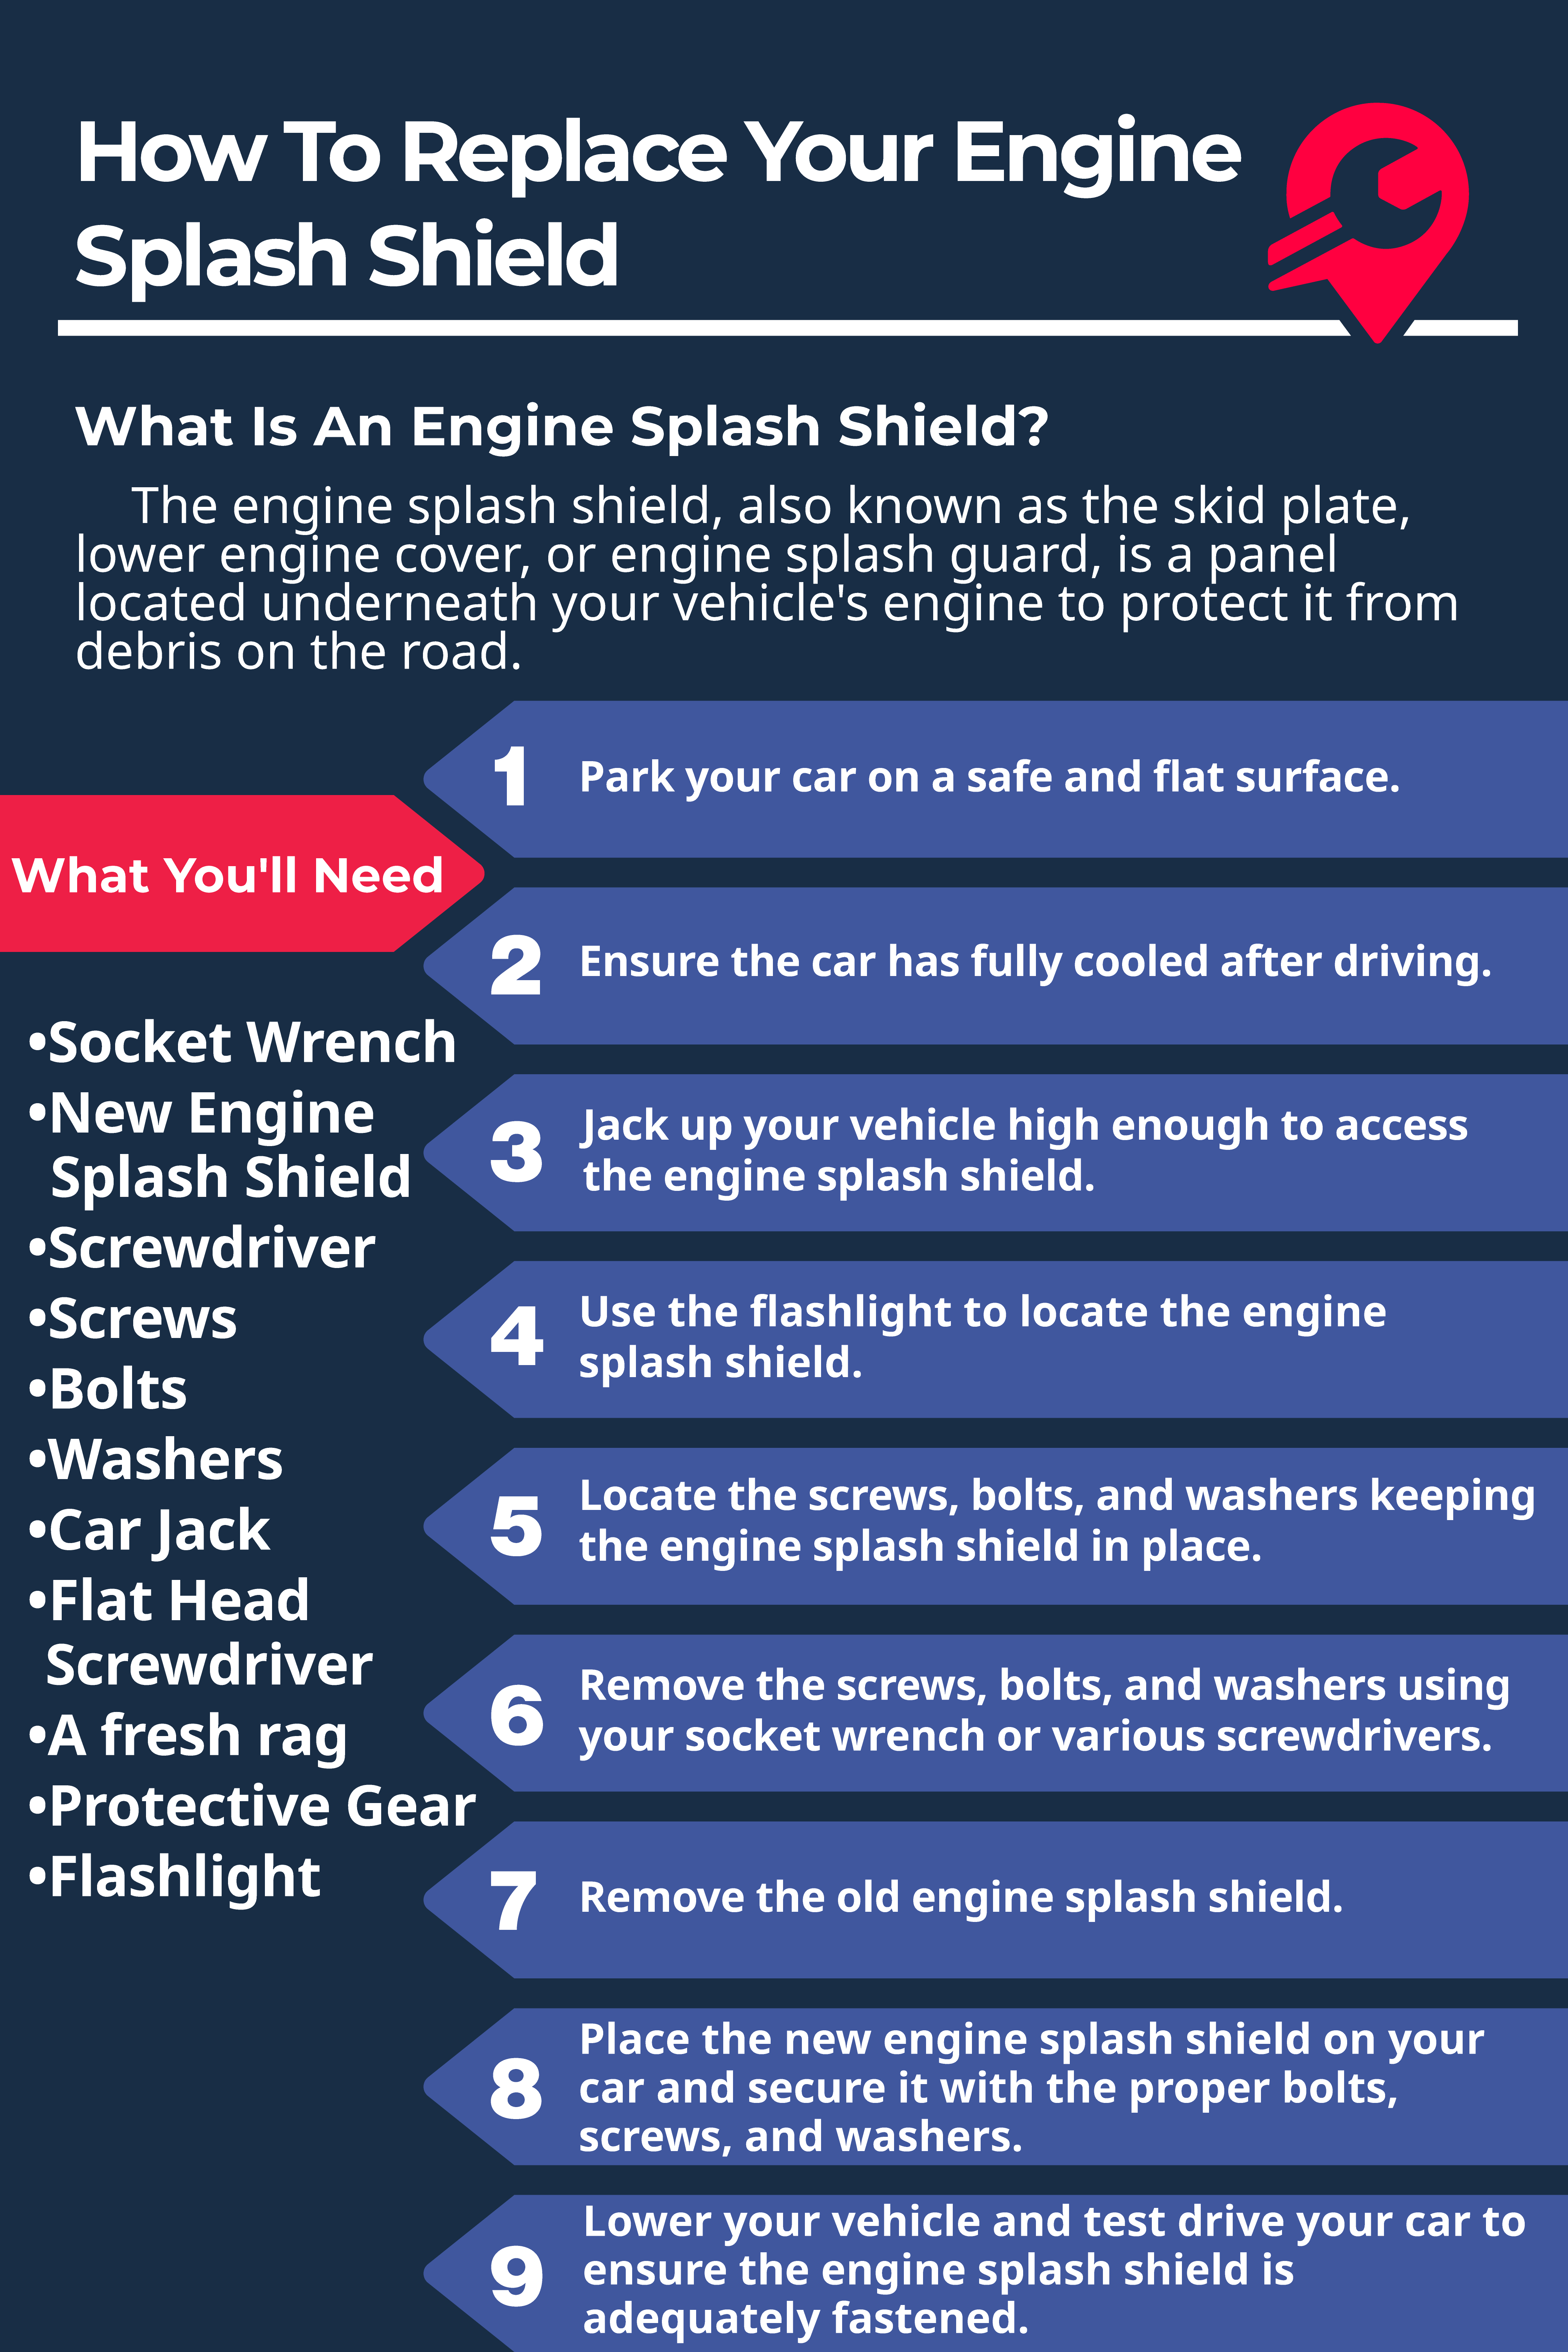 How to replace your engine splash shield infographic